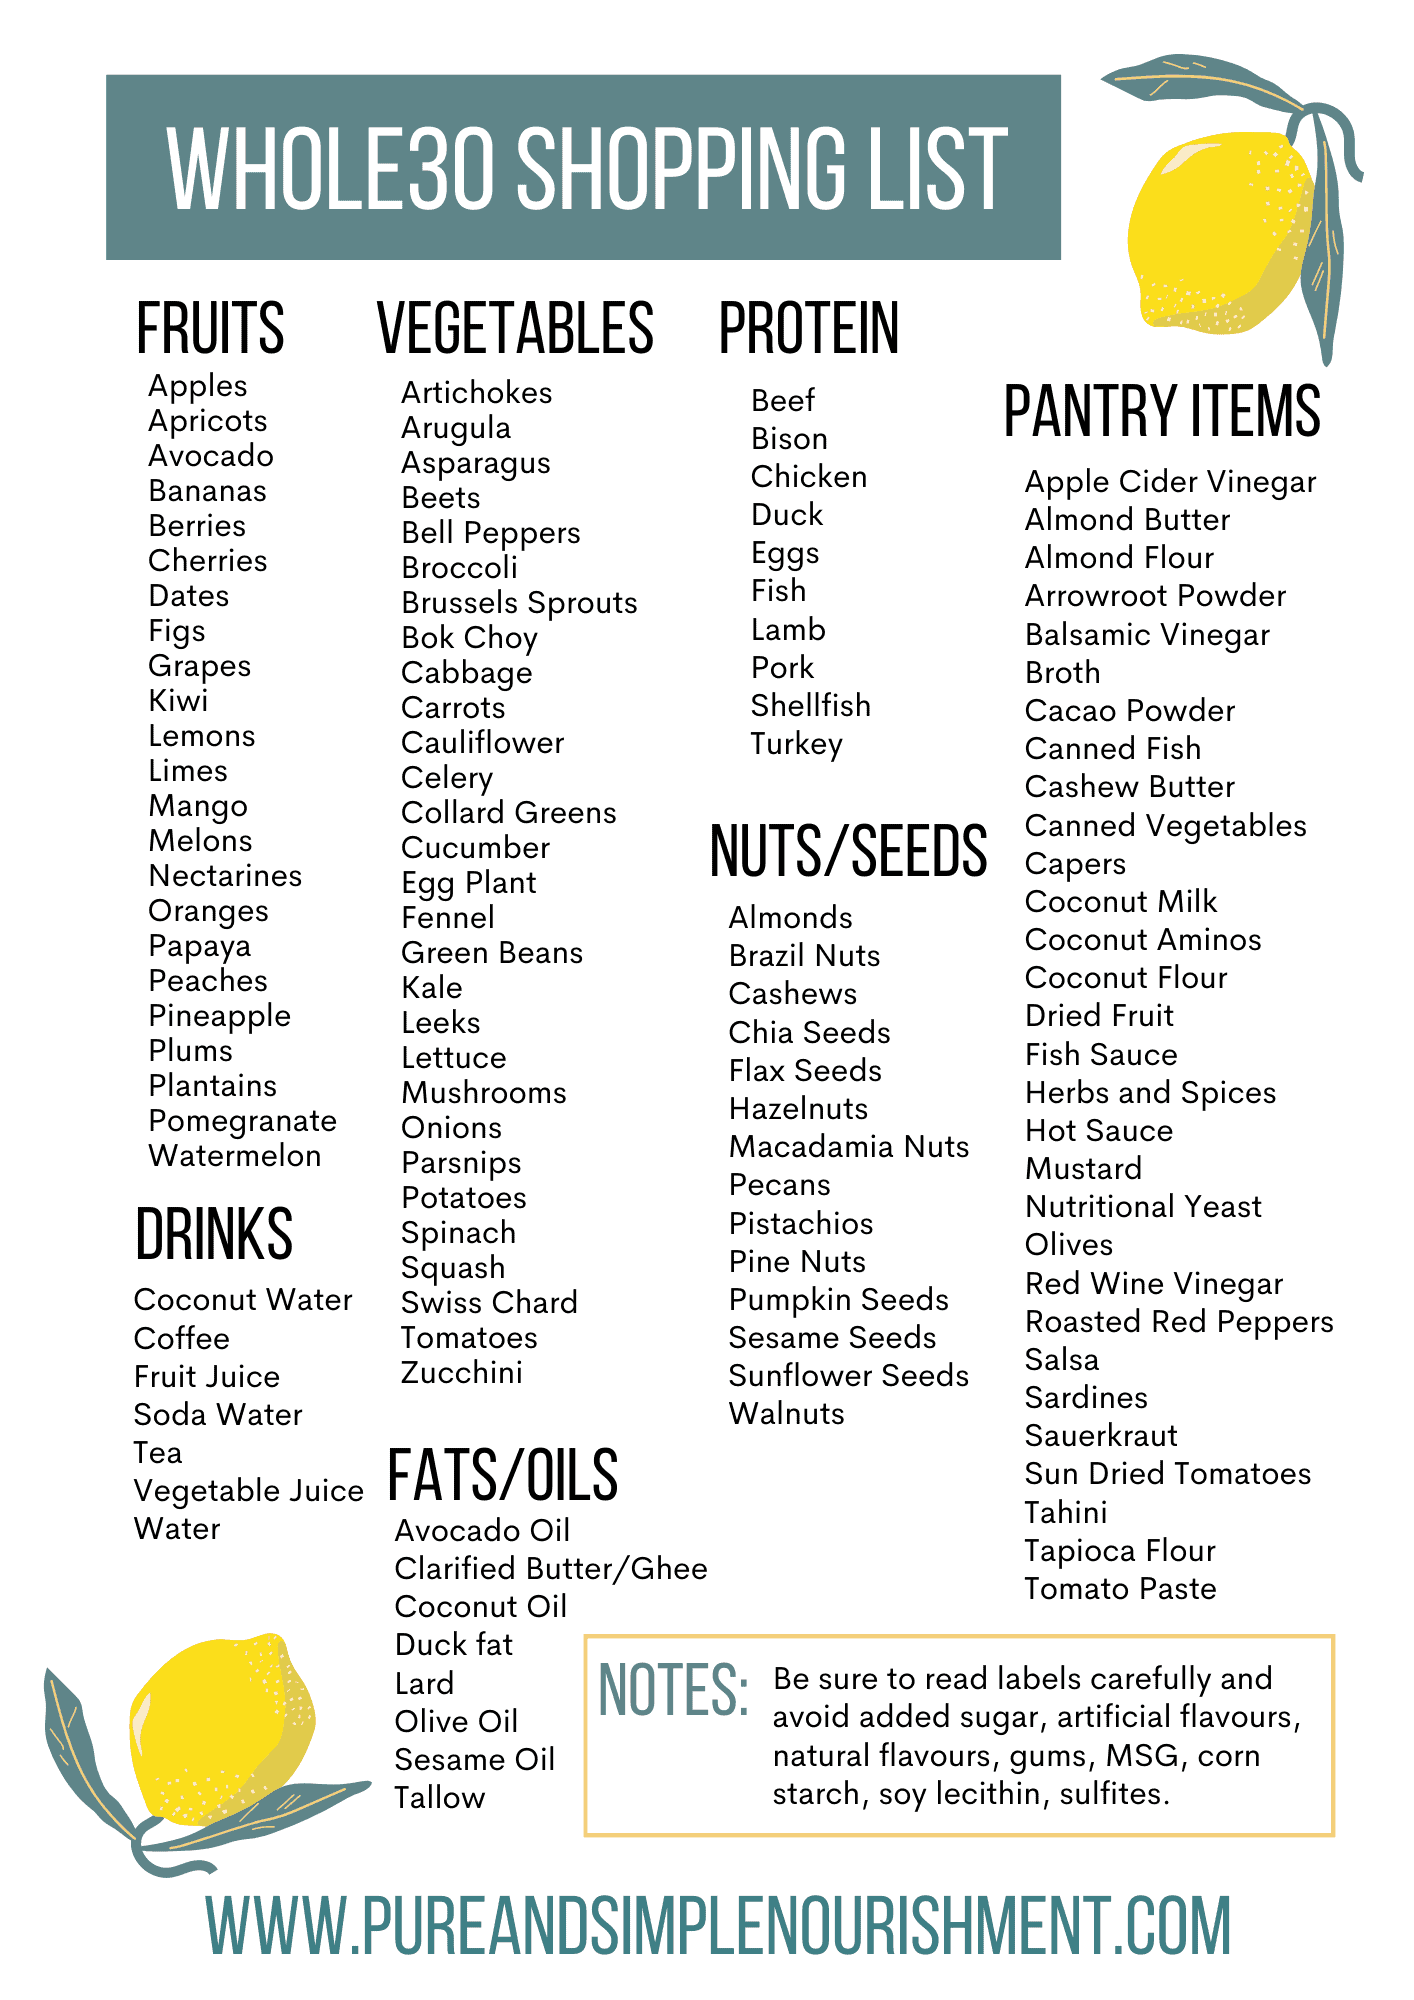 A list of Whole30 approved foods